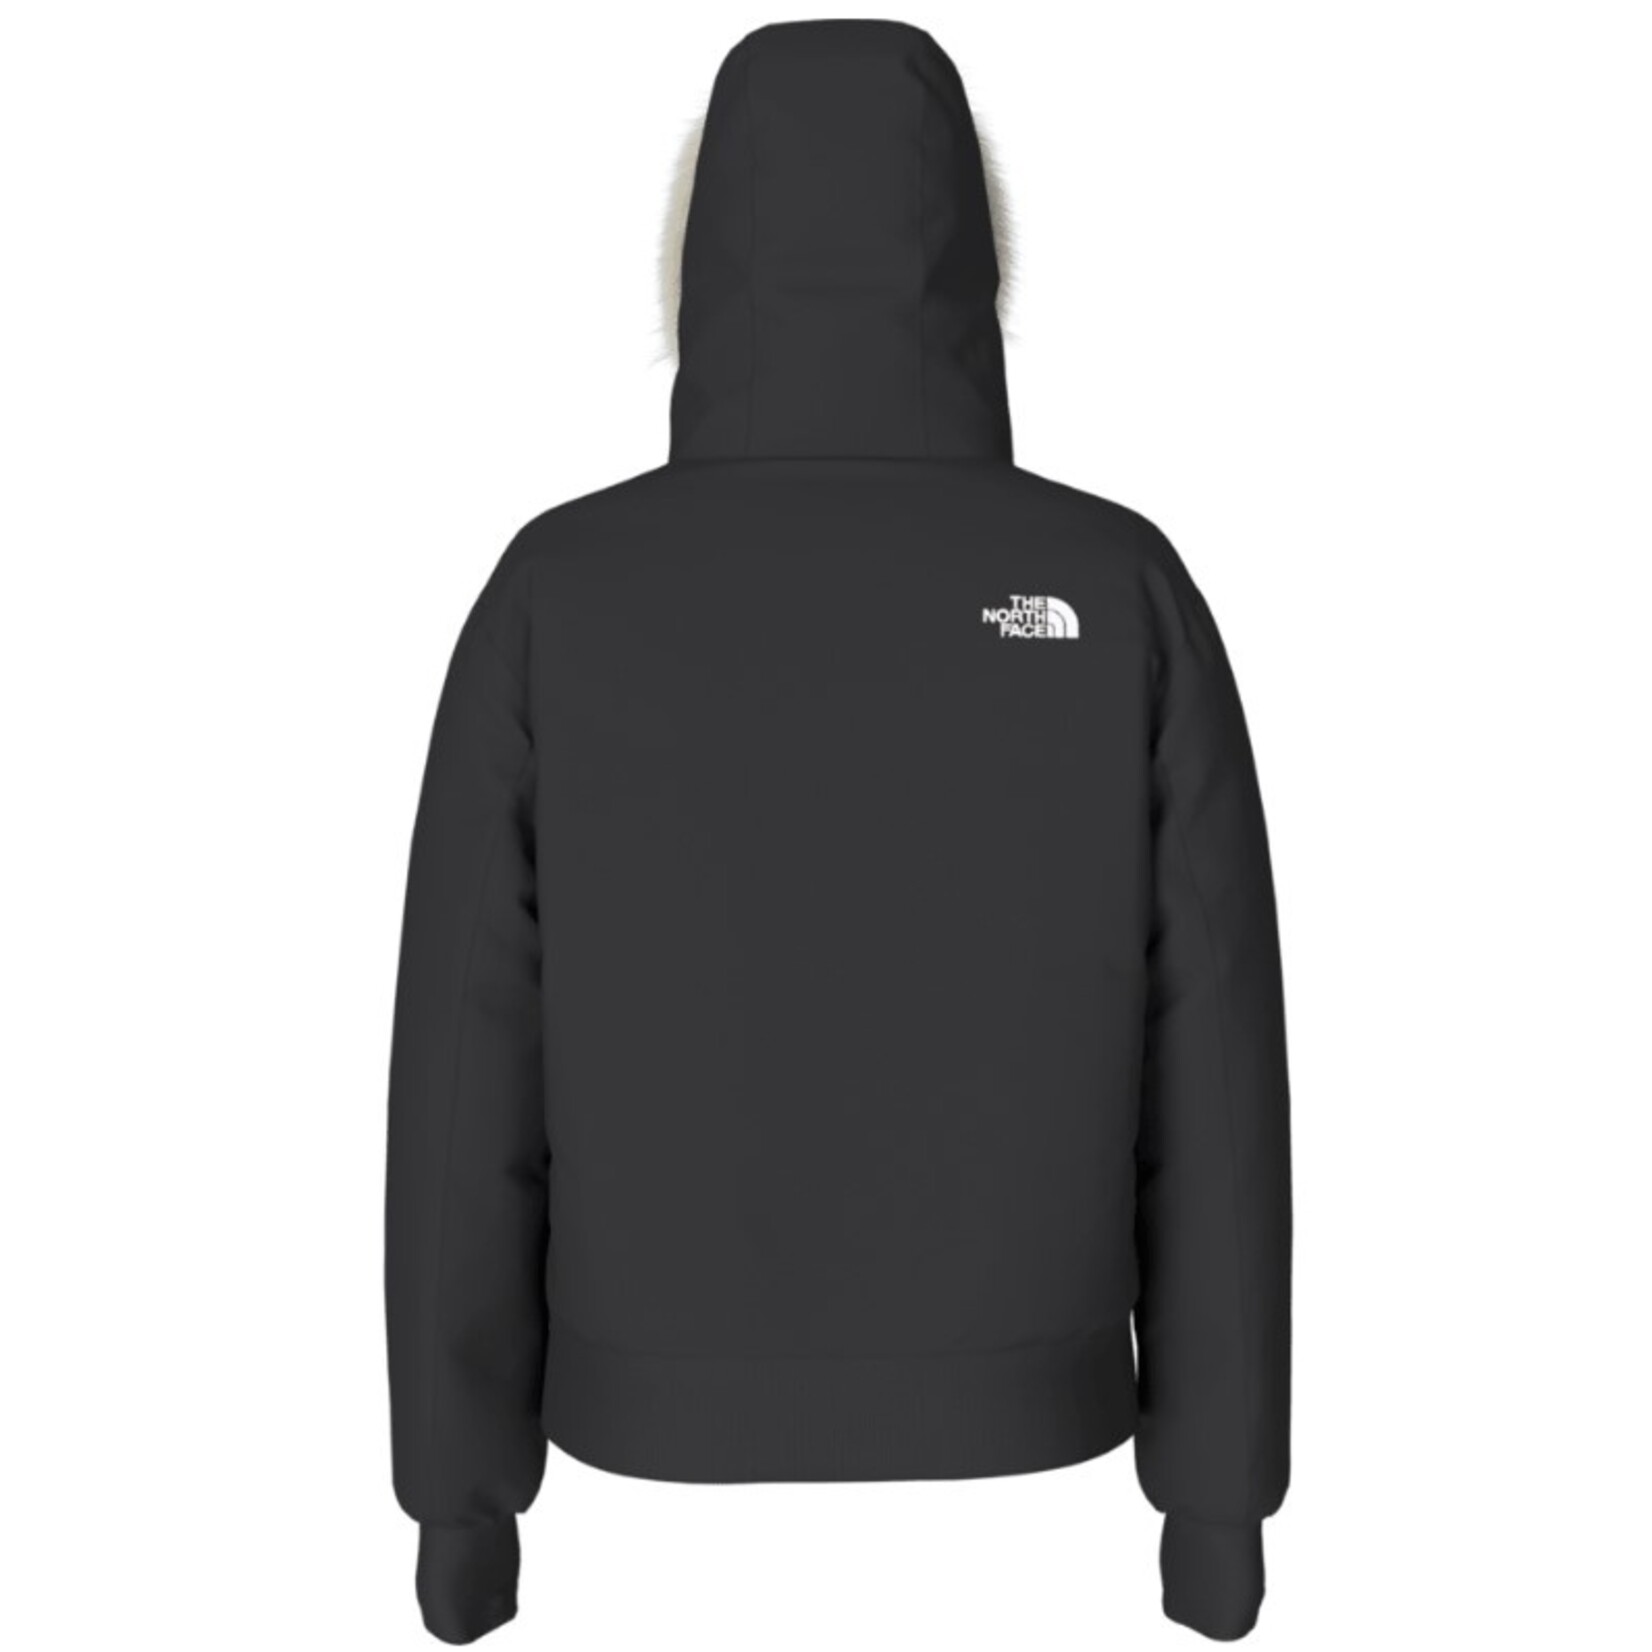 THE NORTH FACE Women's Arctic Bomber-24